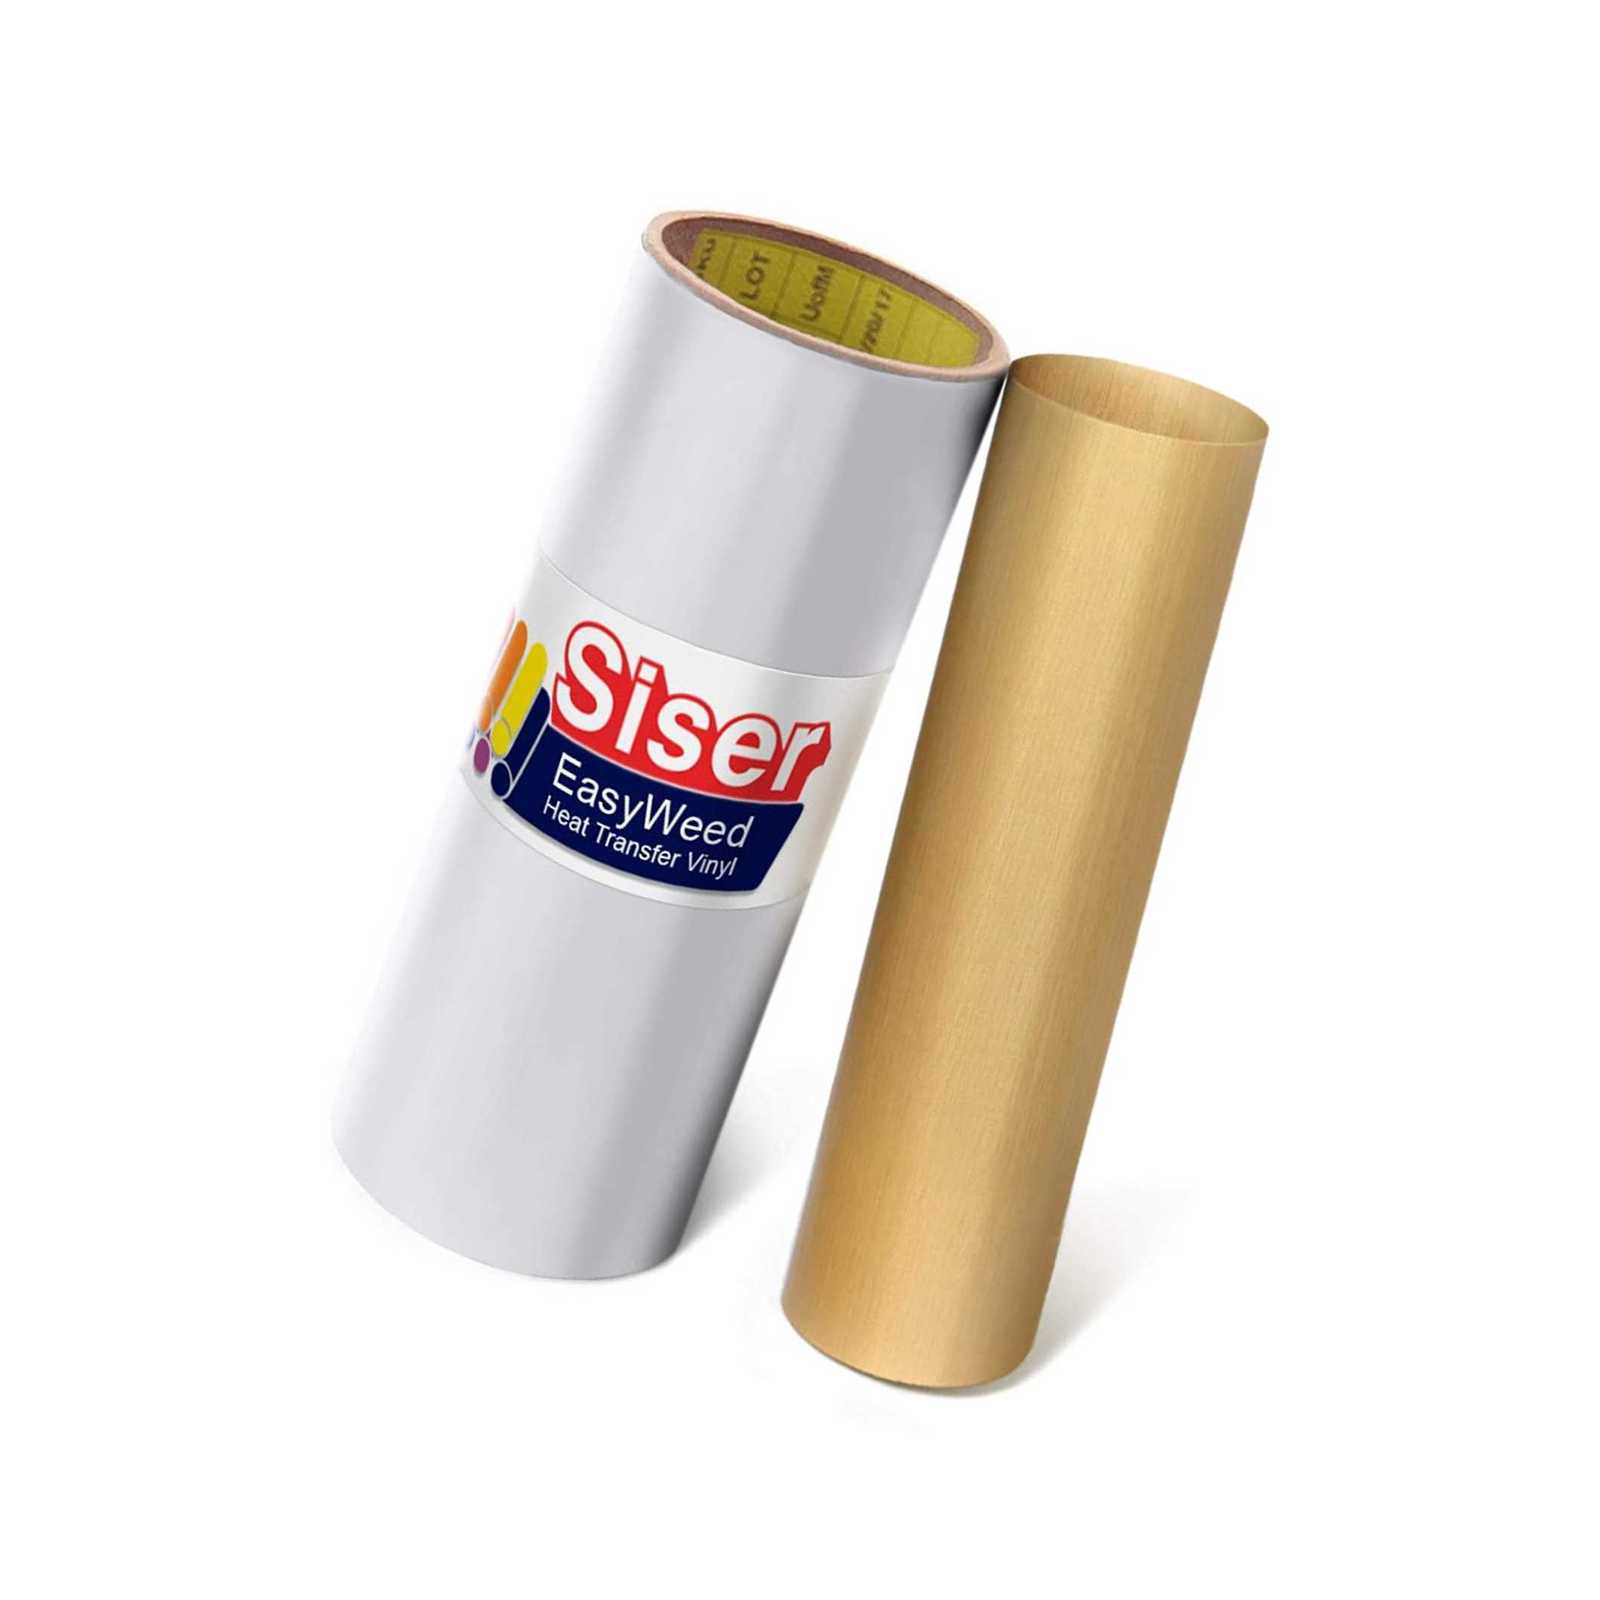 Easy Heat Transfer Craft Vinyl Roll 50Ft X 15 Inch Roll Including Non-Stick T